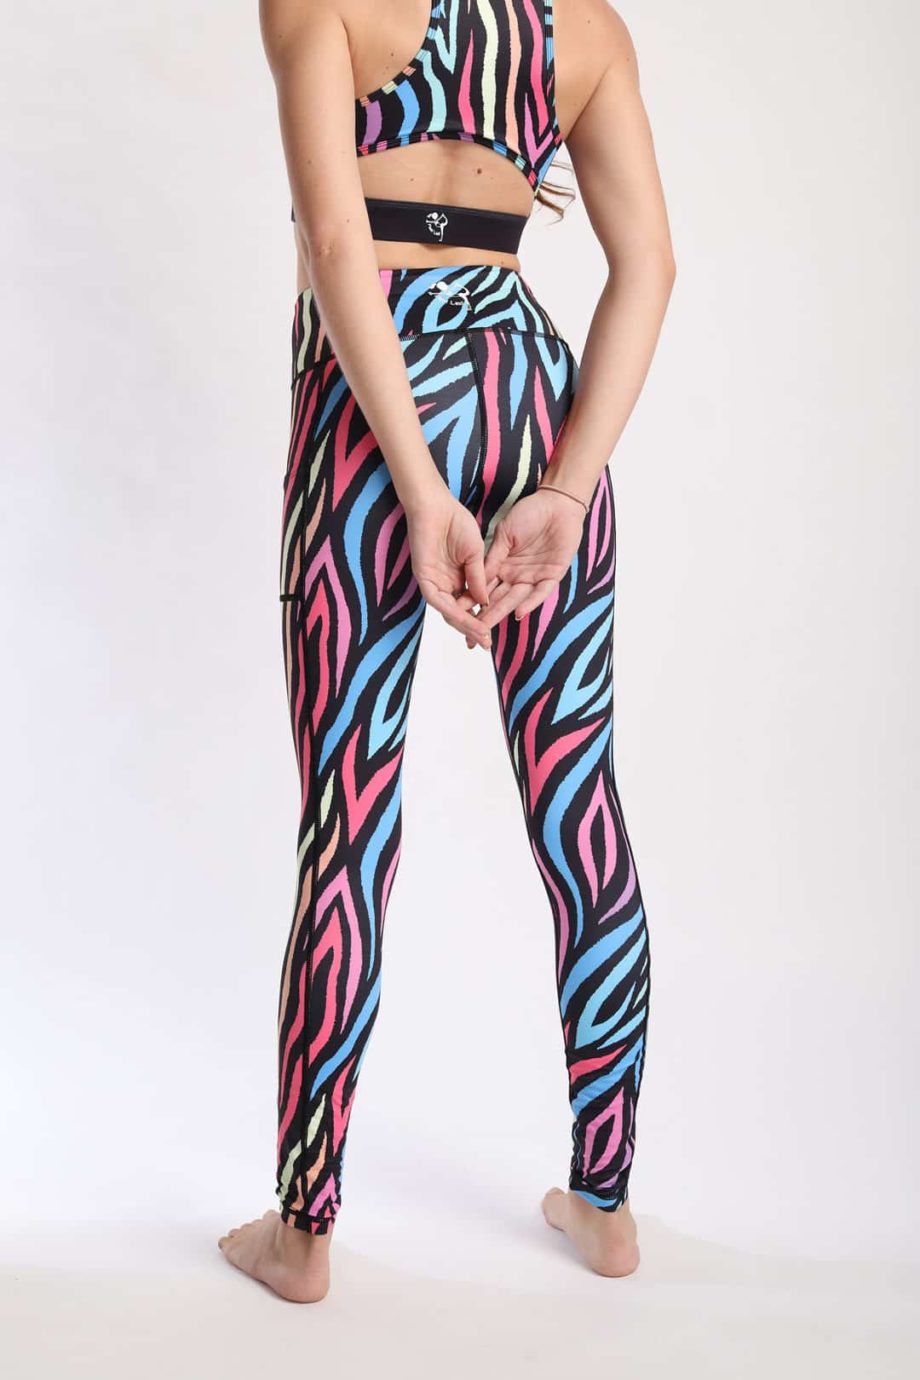 Show Your Stripes Tights from Flexi Lexi Fitness. High-Rise Pocket Legging - Made from recycled water bottles